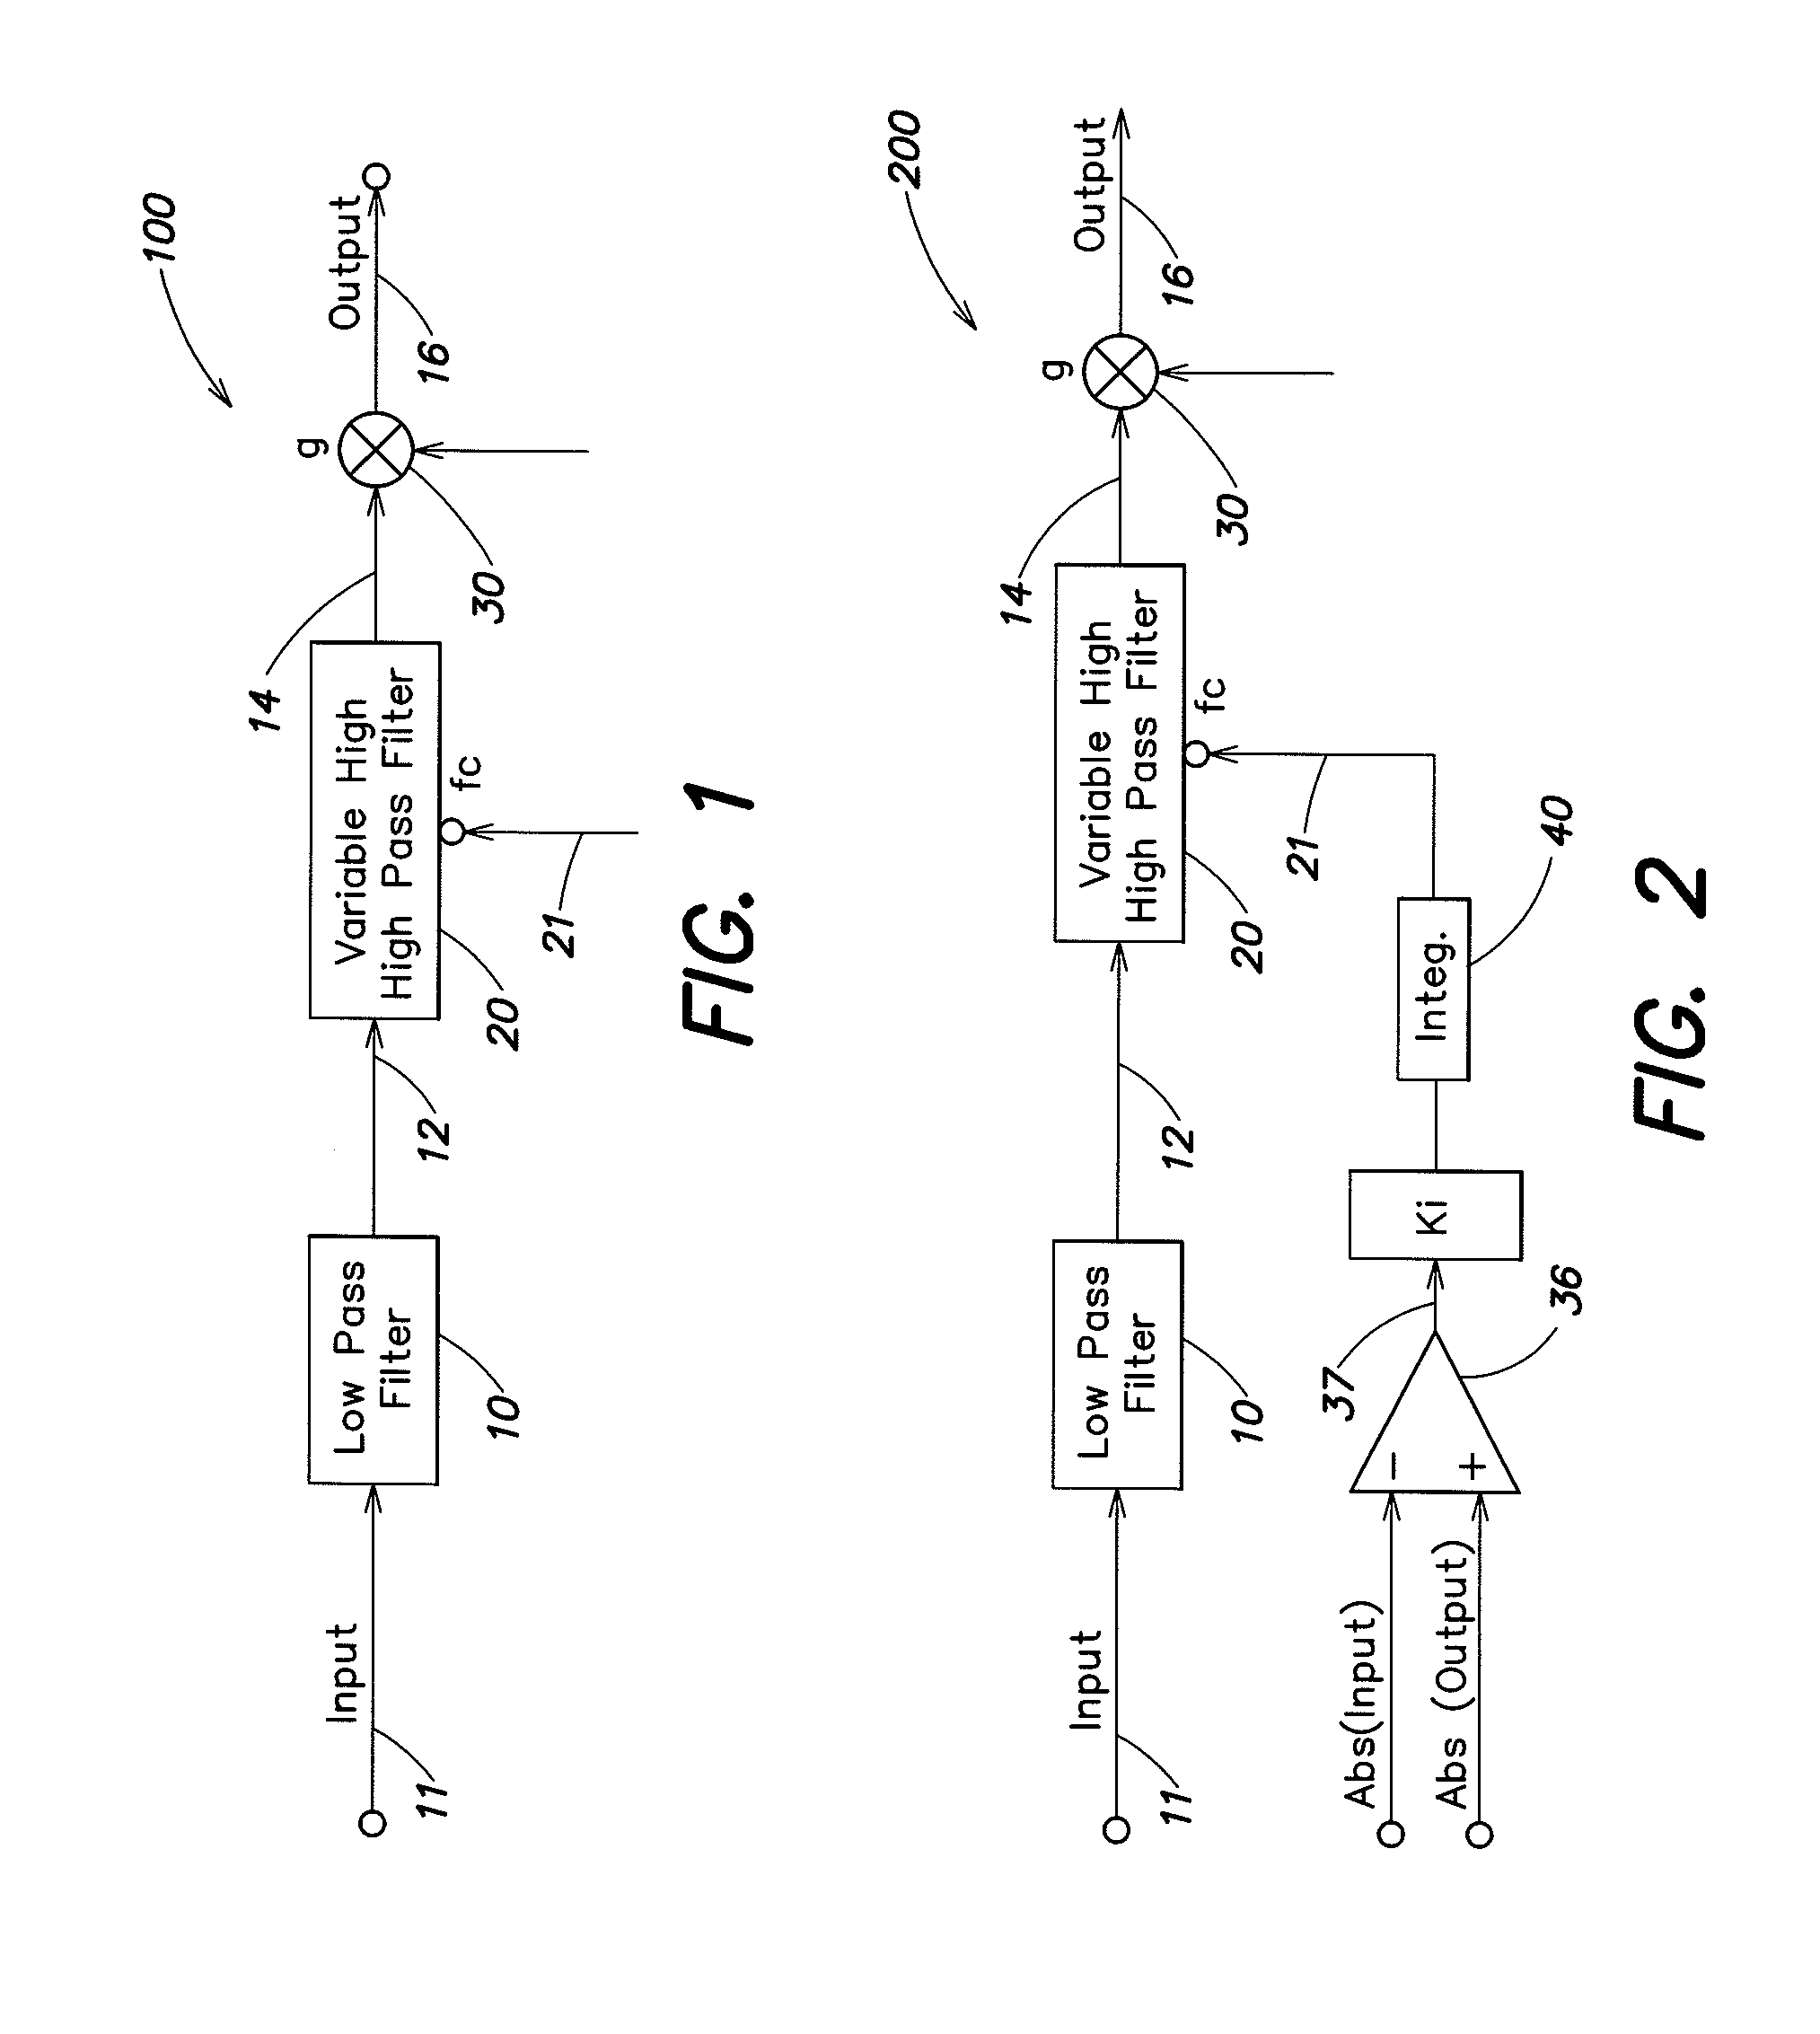 Circuit for improving the intelligibility of audio signals containing speech